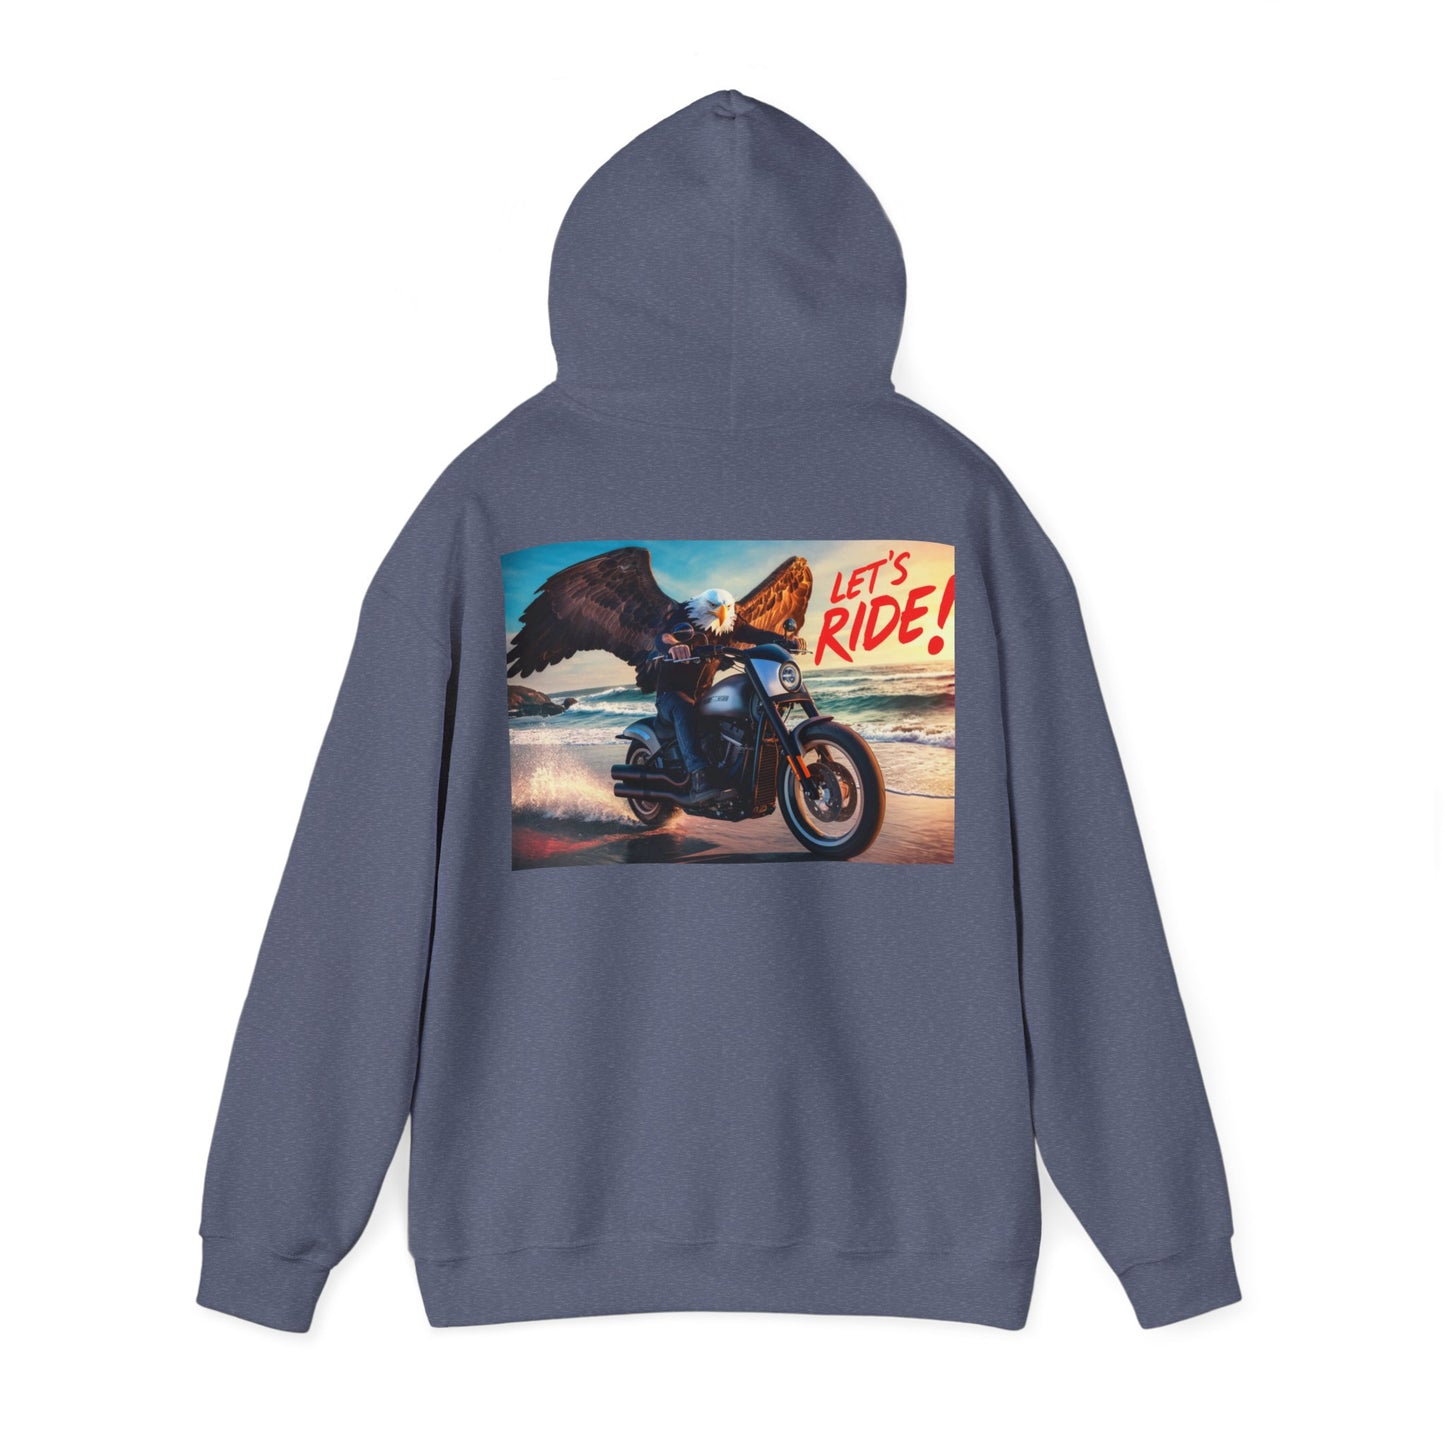 Let's Ride, Eagle Riding Motorcycle - Hoodie